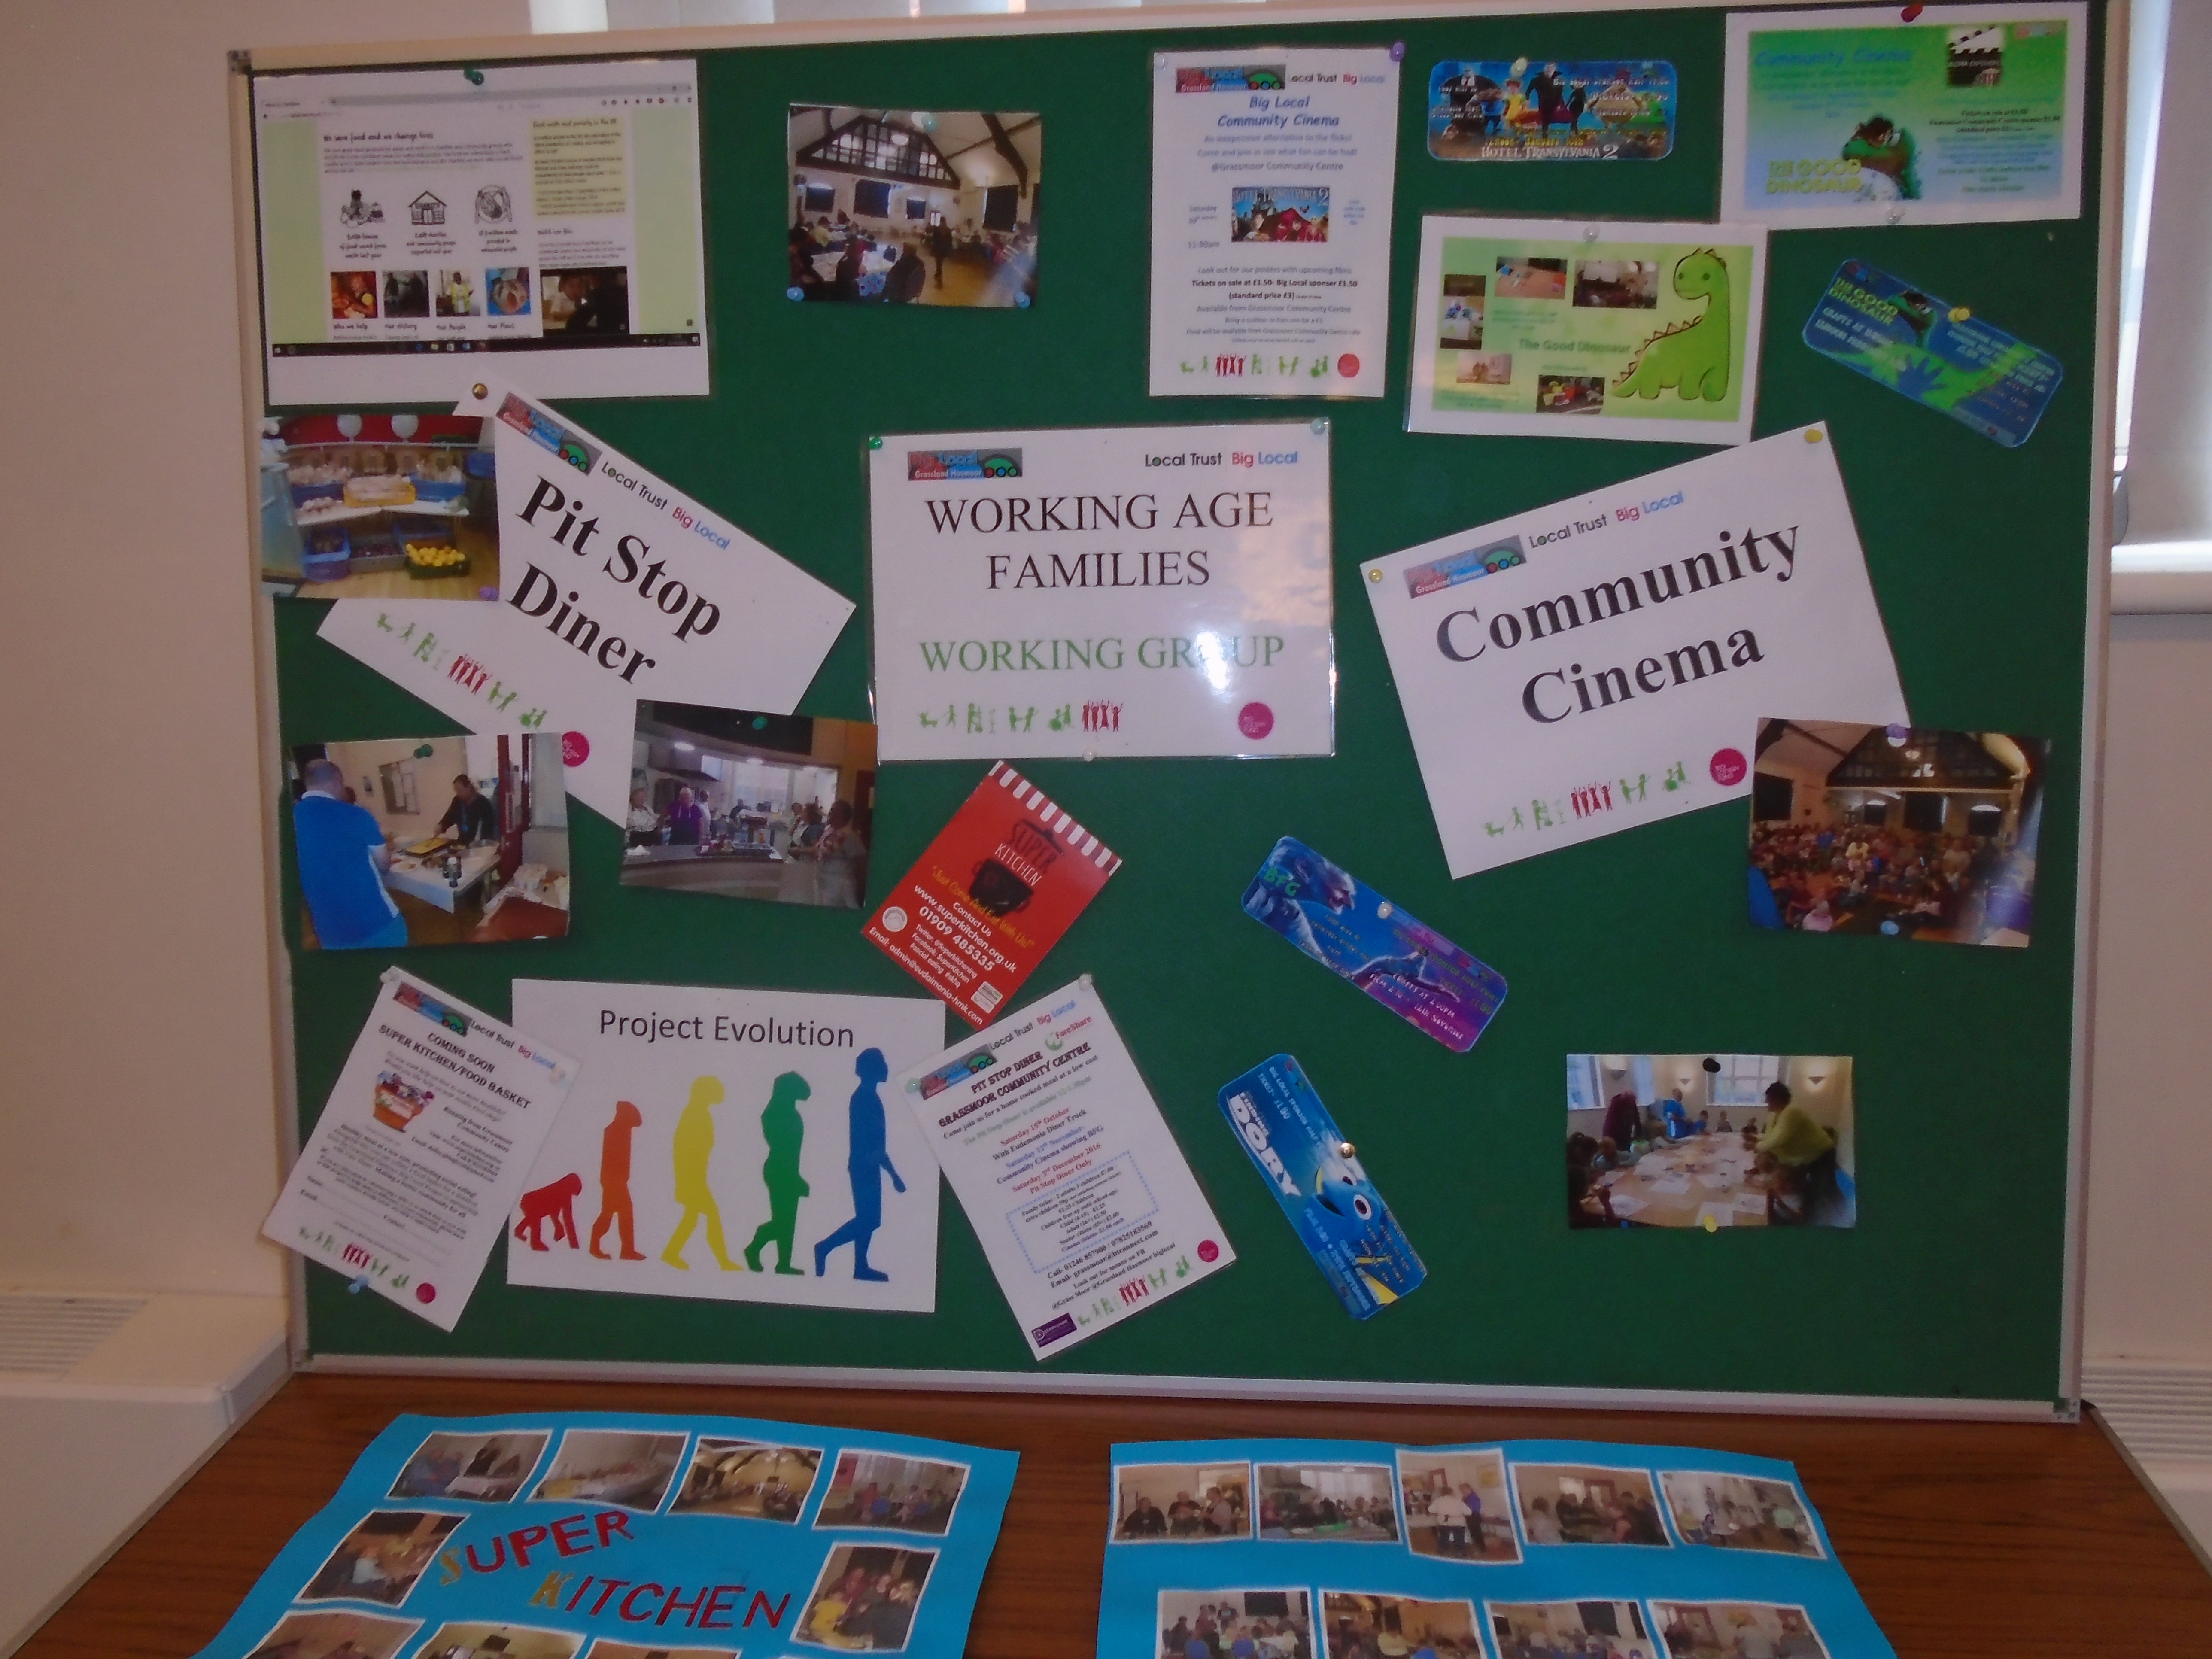 Dislays from the BL groups enabled us all to see what has been achieved in each others' BL areas. This board shows some of the activities offered by the Working Age Families group.